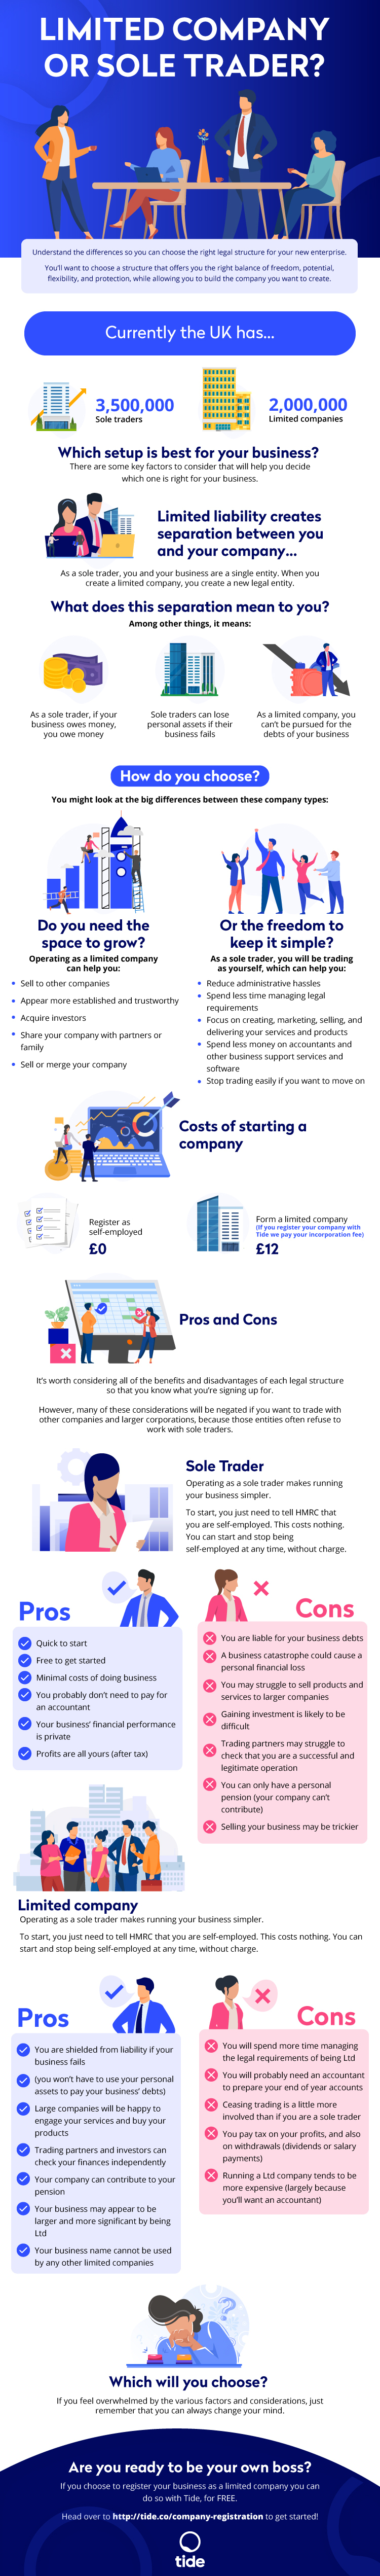 Limited company vs sole trader infographic